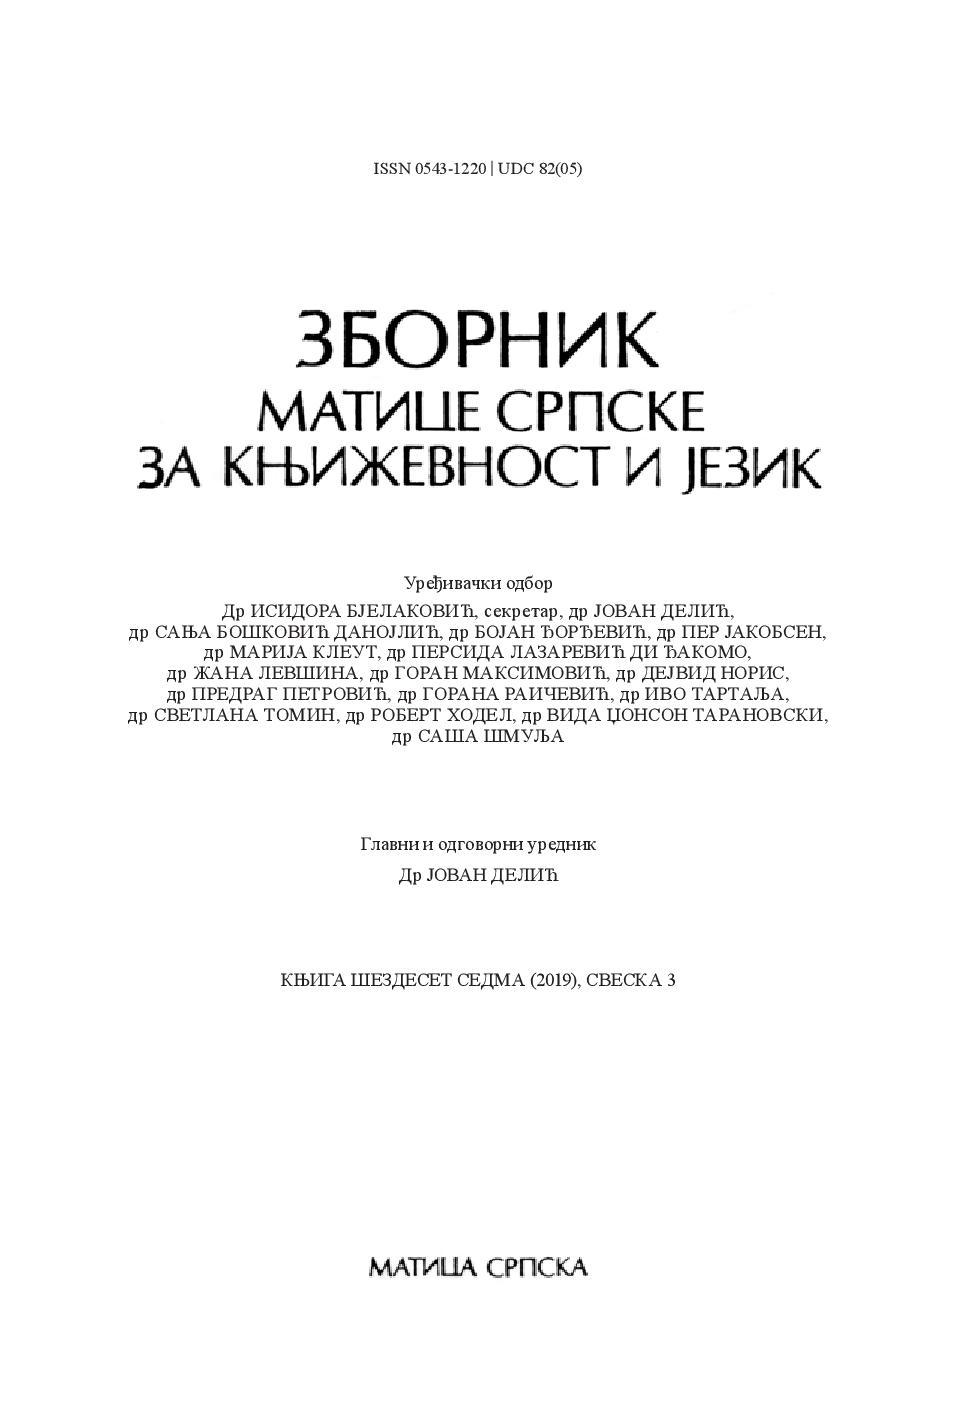 STRUCTURE OF SATIRICAL TEXTS PETAR PAJIĆ Cover Image